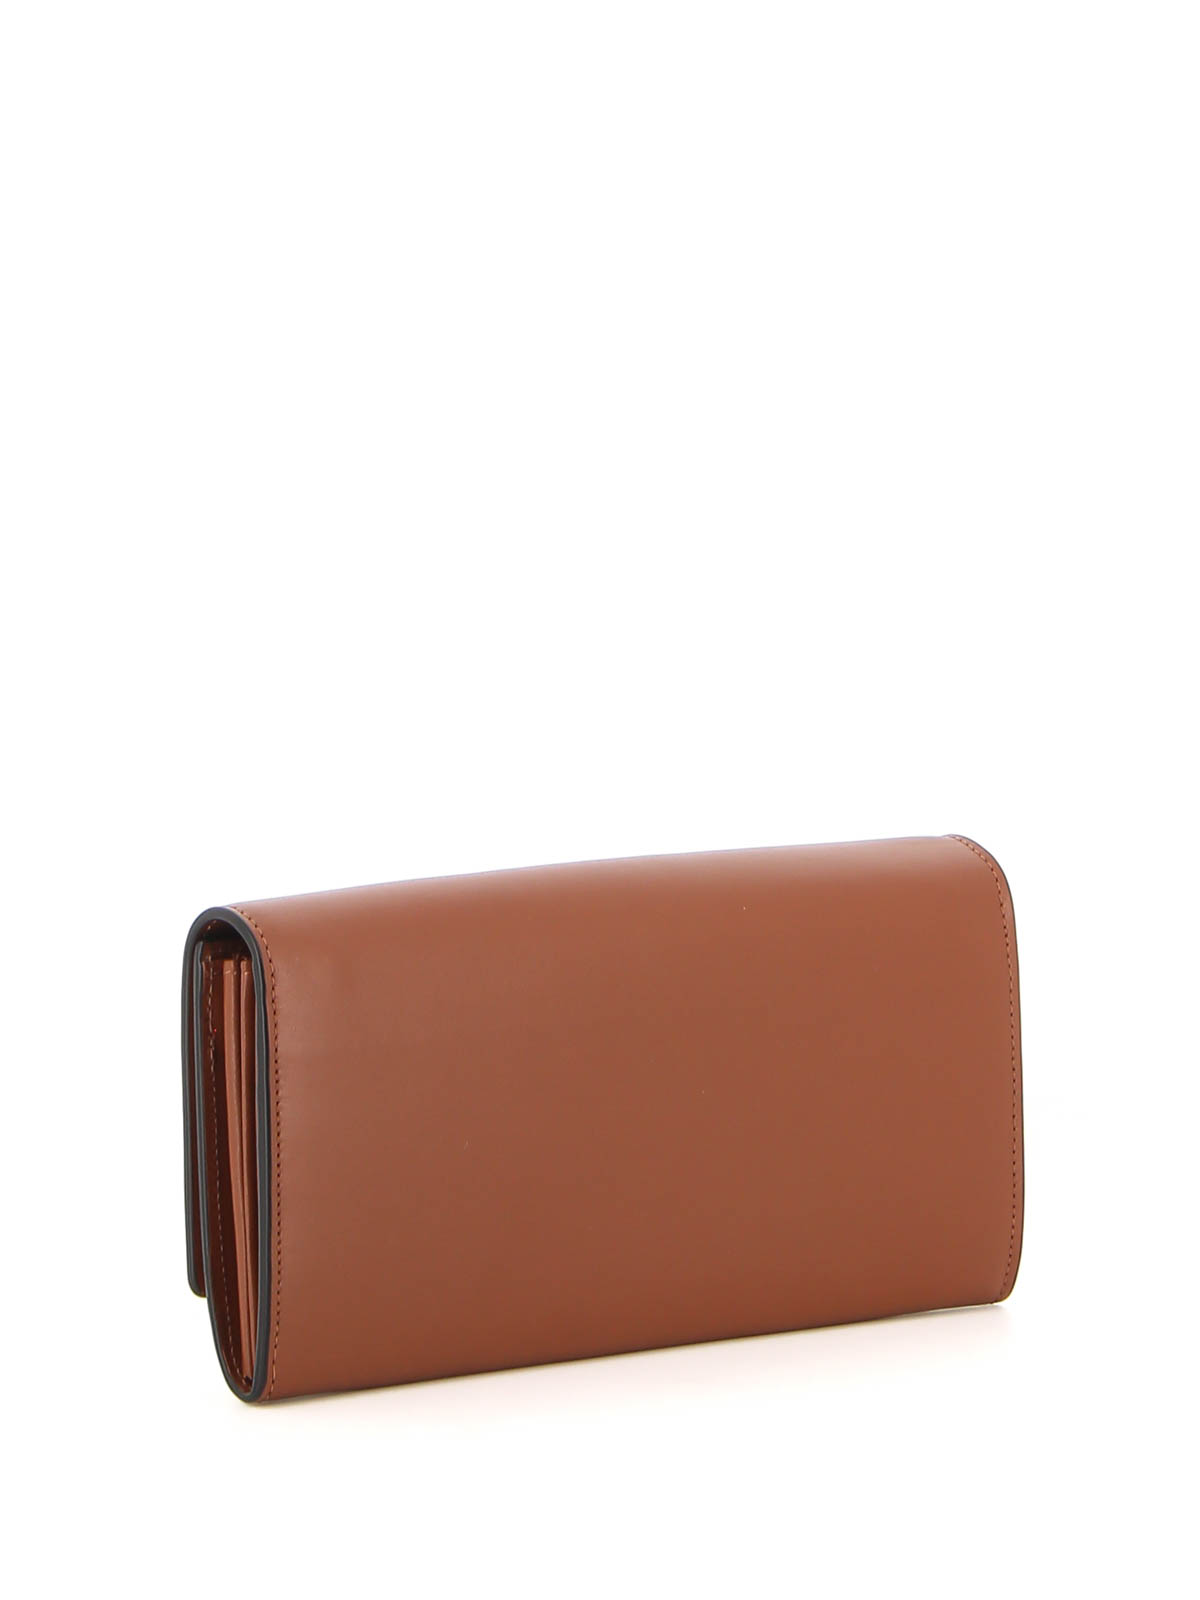 Wallets & purses Orciani - Soft leather wallet - SD0129LIBERTYCUOIO